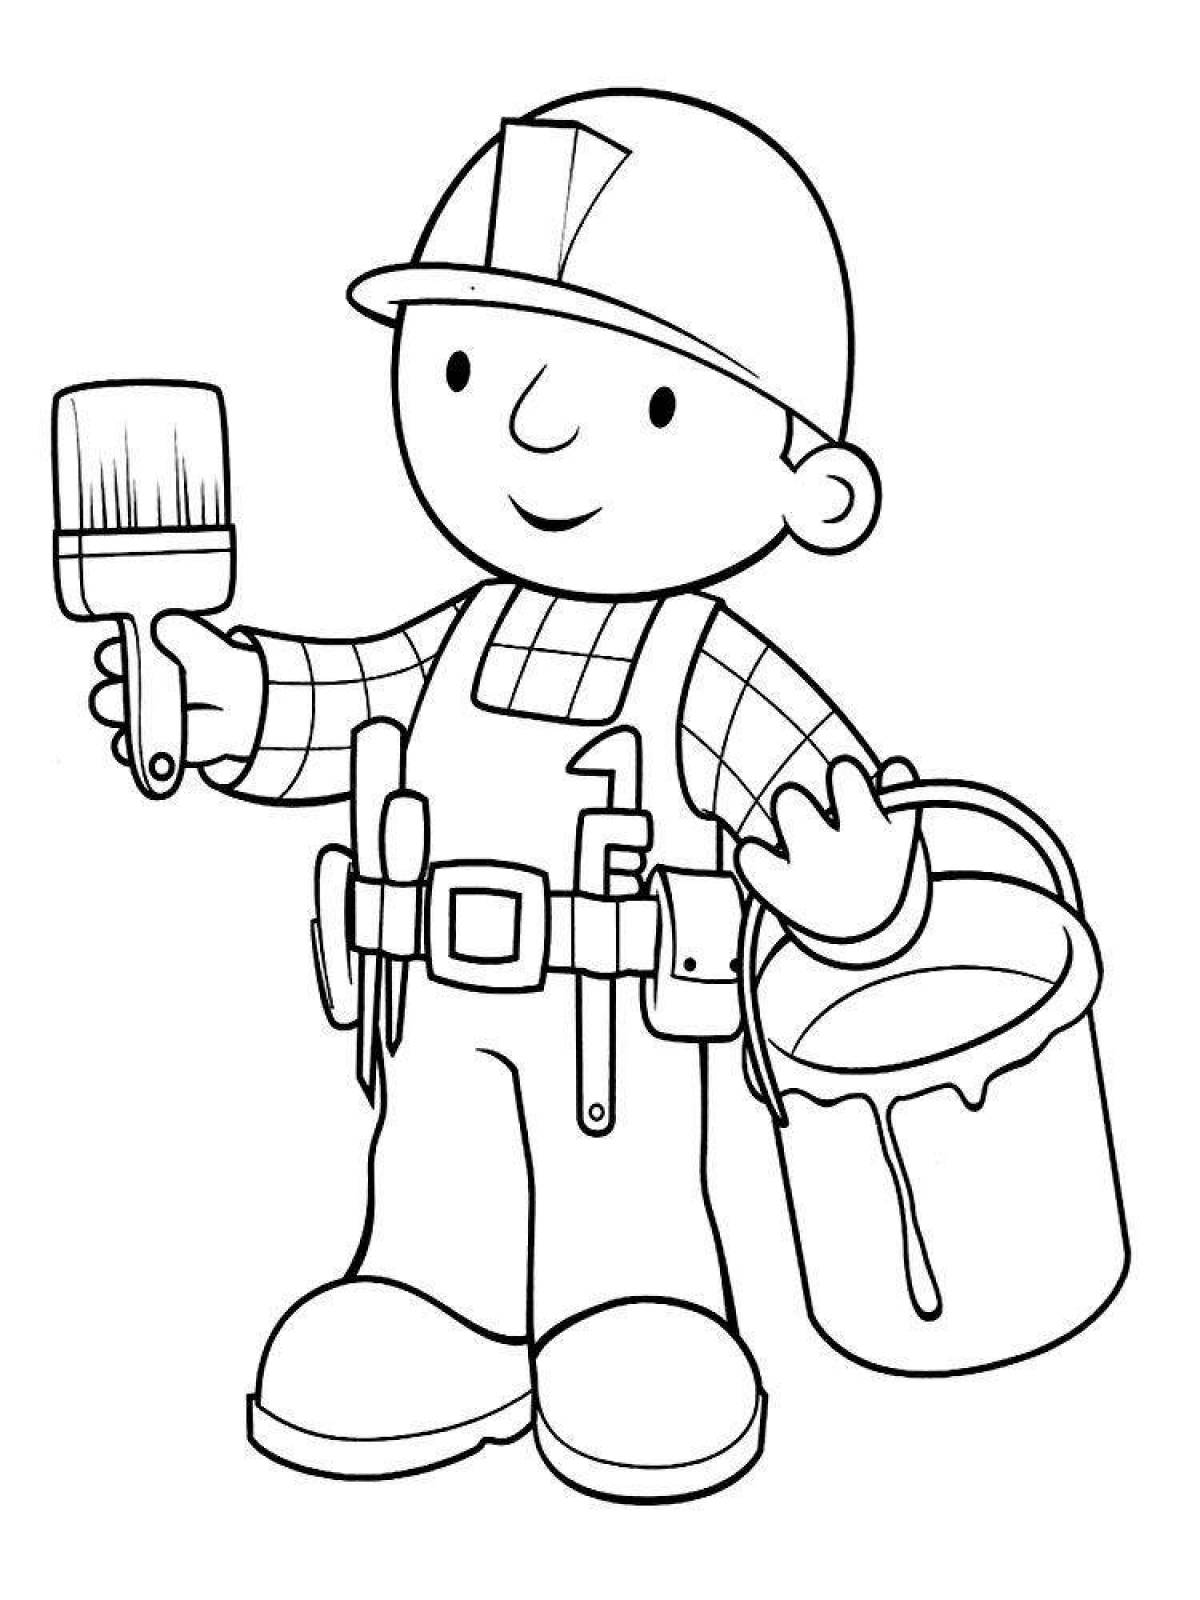 Colorful builder coloring book for kids